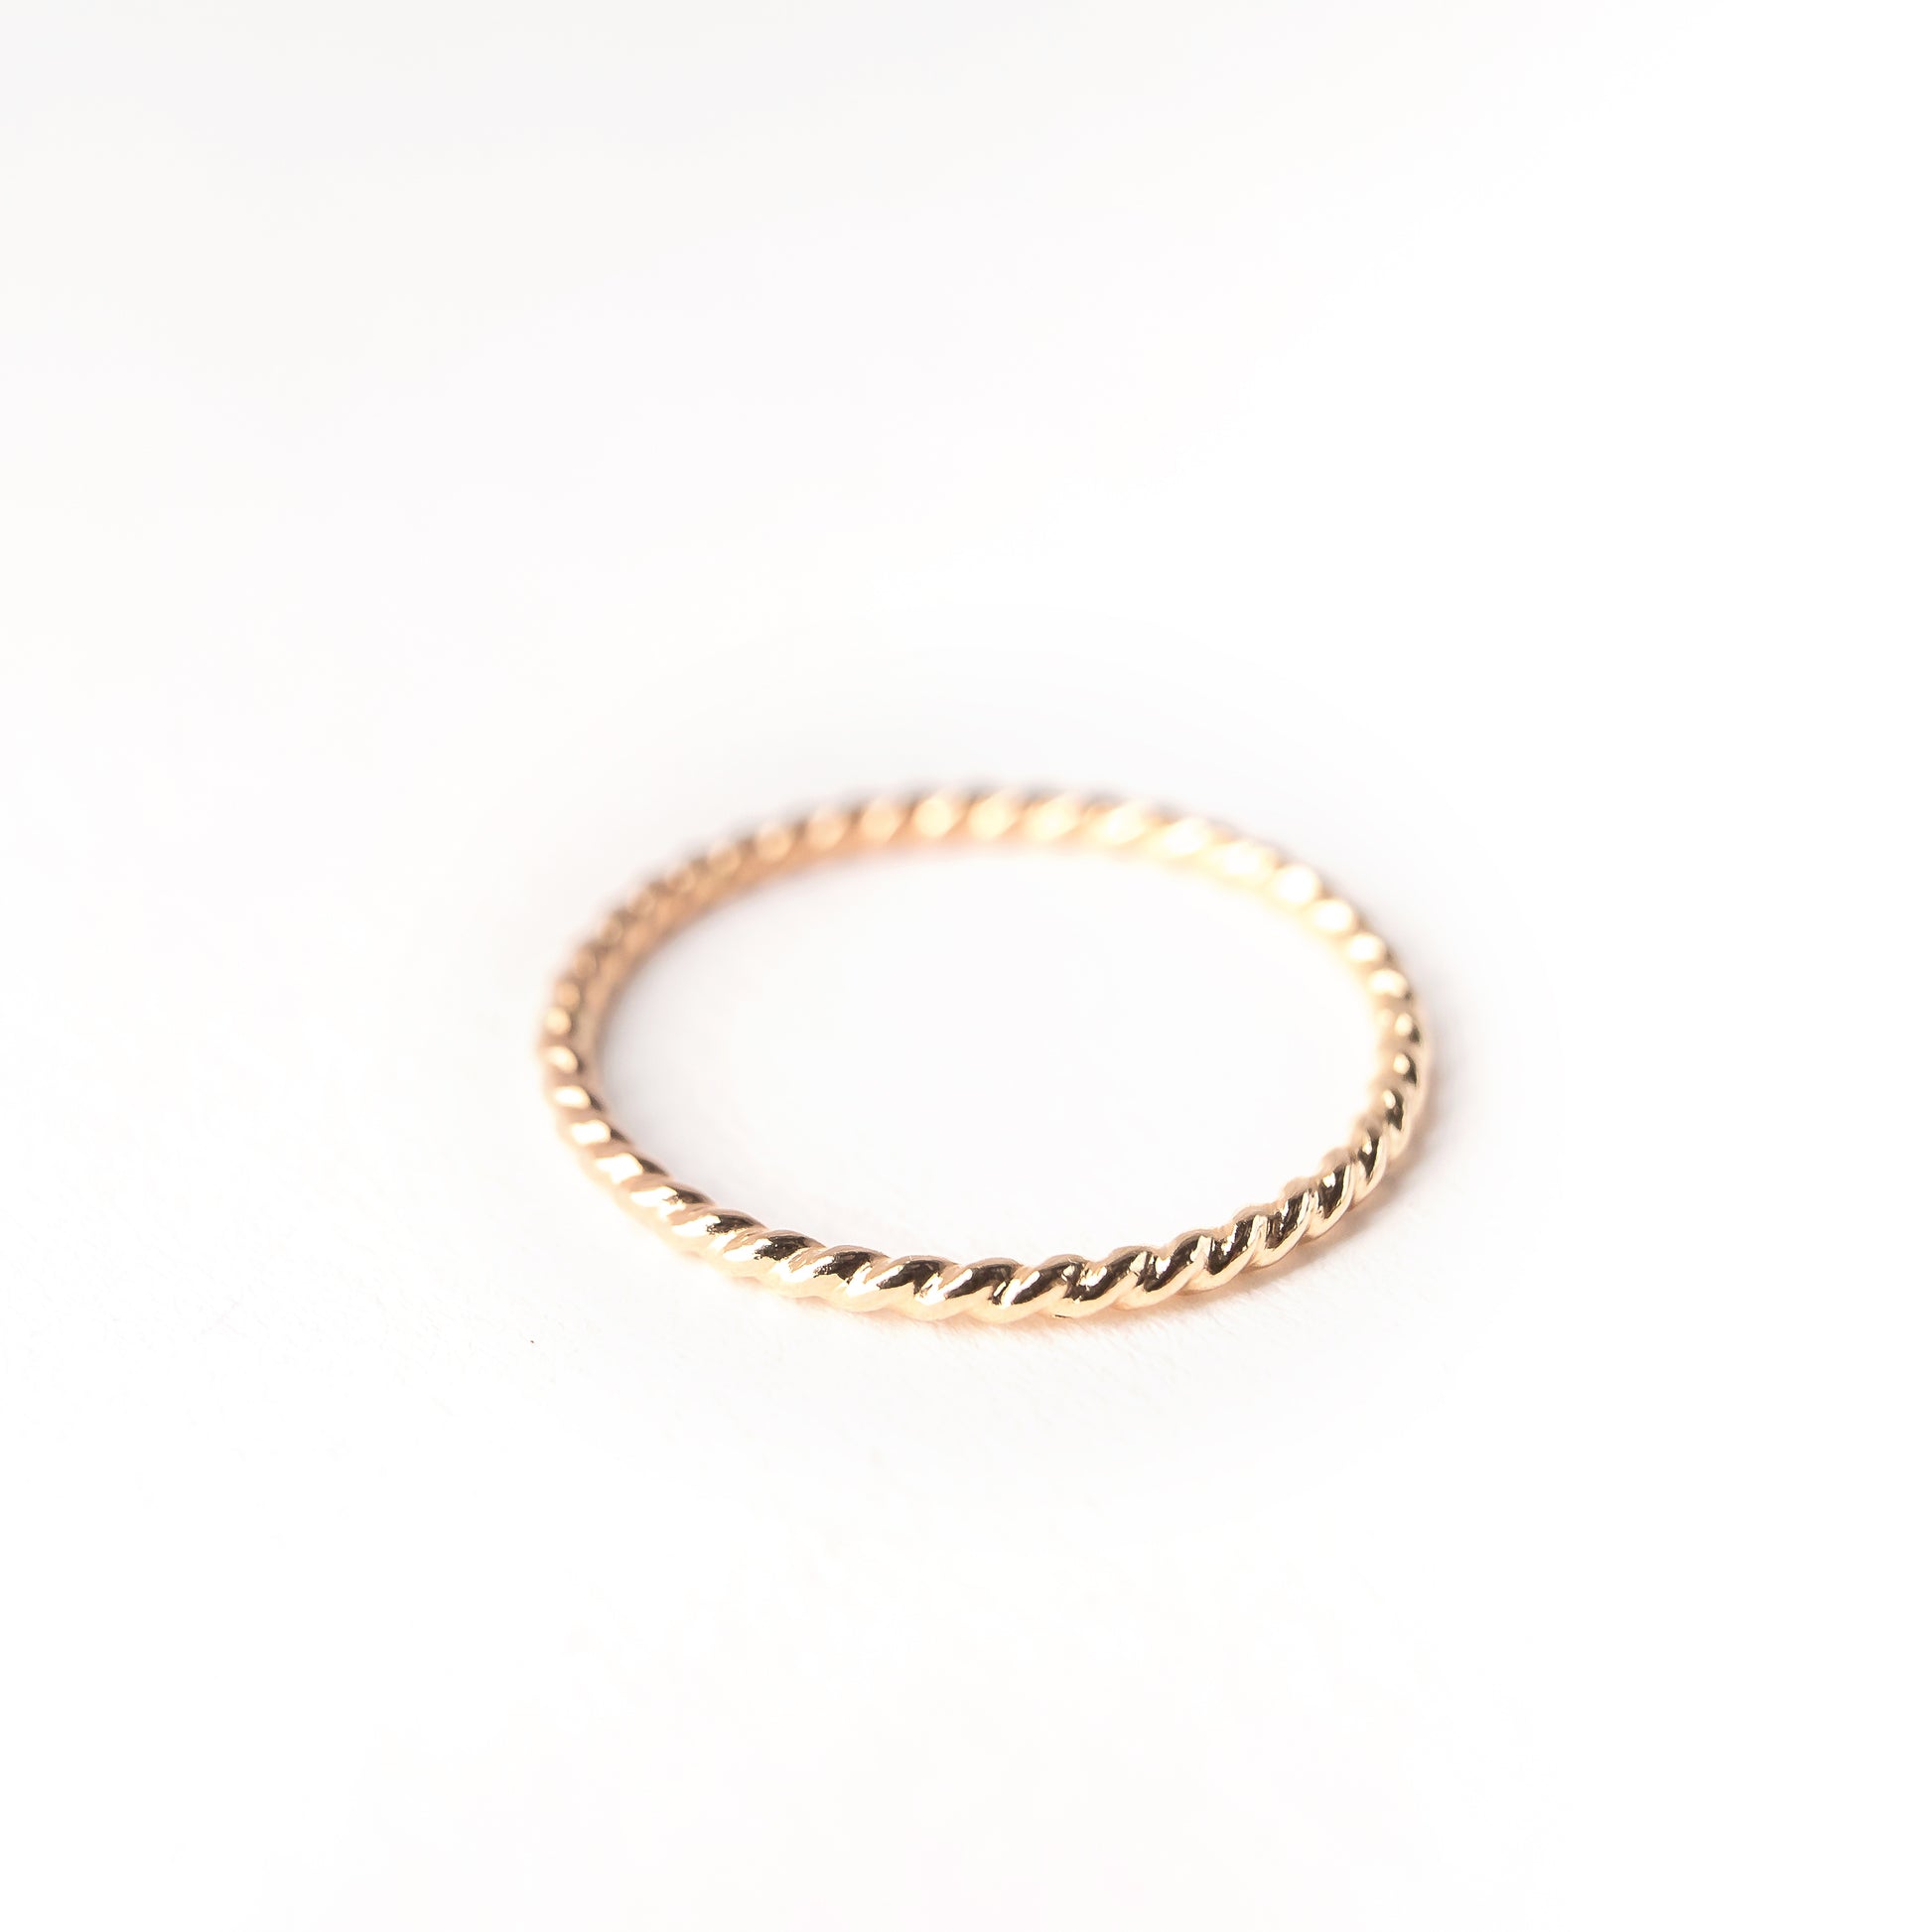 Gold Bracelet for Women: How Can You Style It - Adorn512 – adorn512